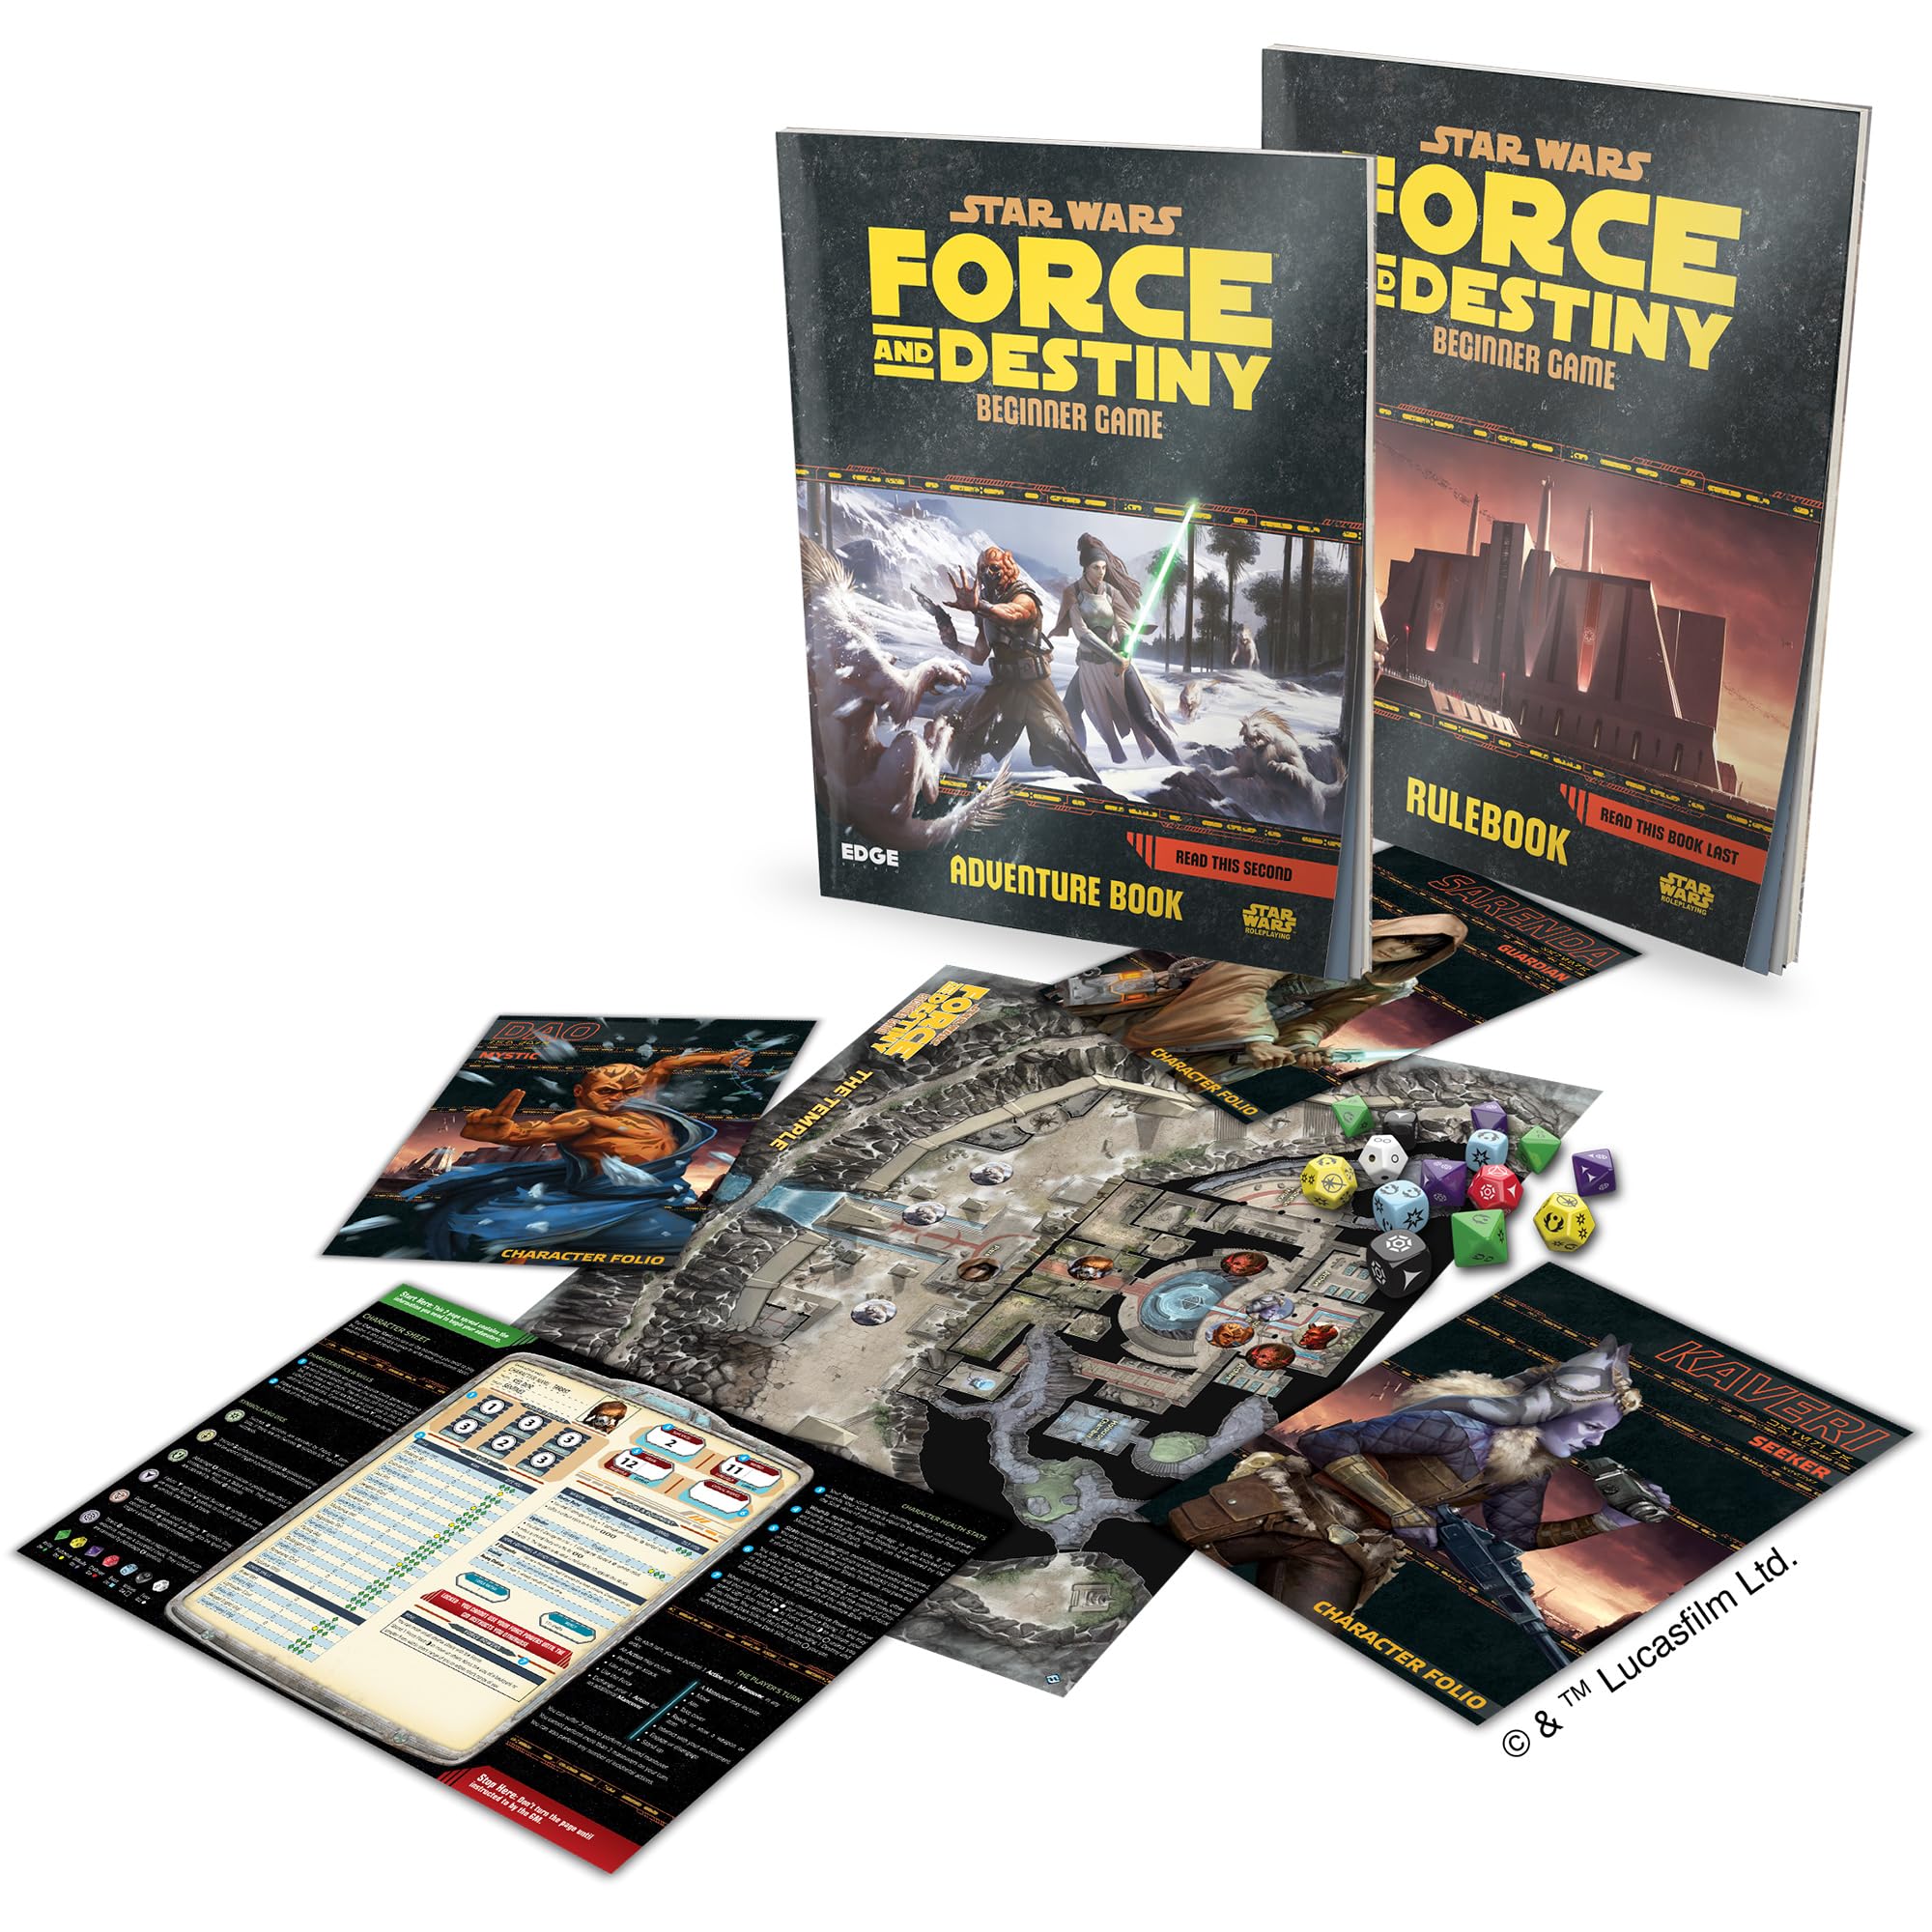 EDGE Studio Star Wars - Force and Destiny: Beginner Game Ignite Your Lightsabers and Discover Your Force Destiny! Sci-Fi Roleplaying Game, Ages 10+, 3-5 Players, 1 Hour Playtime, Made